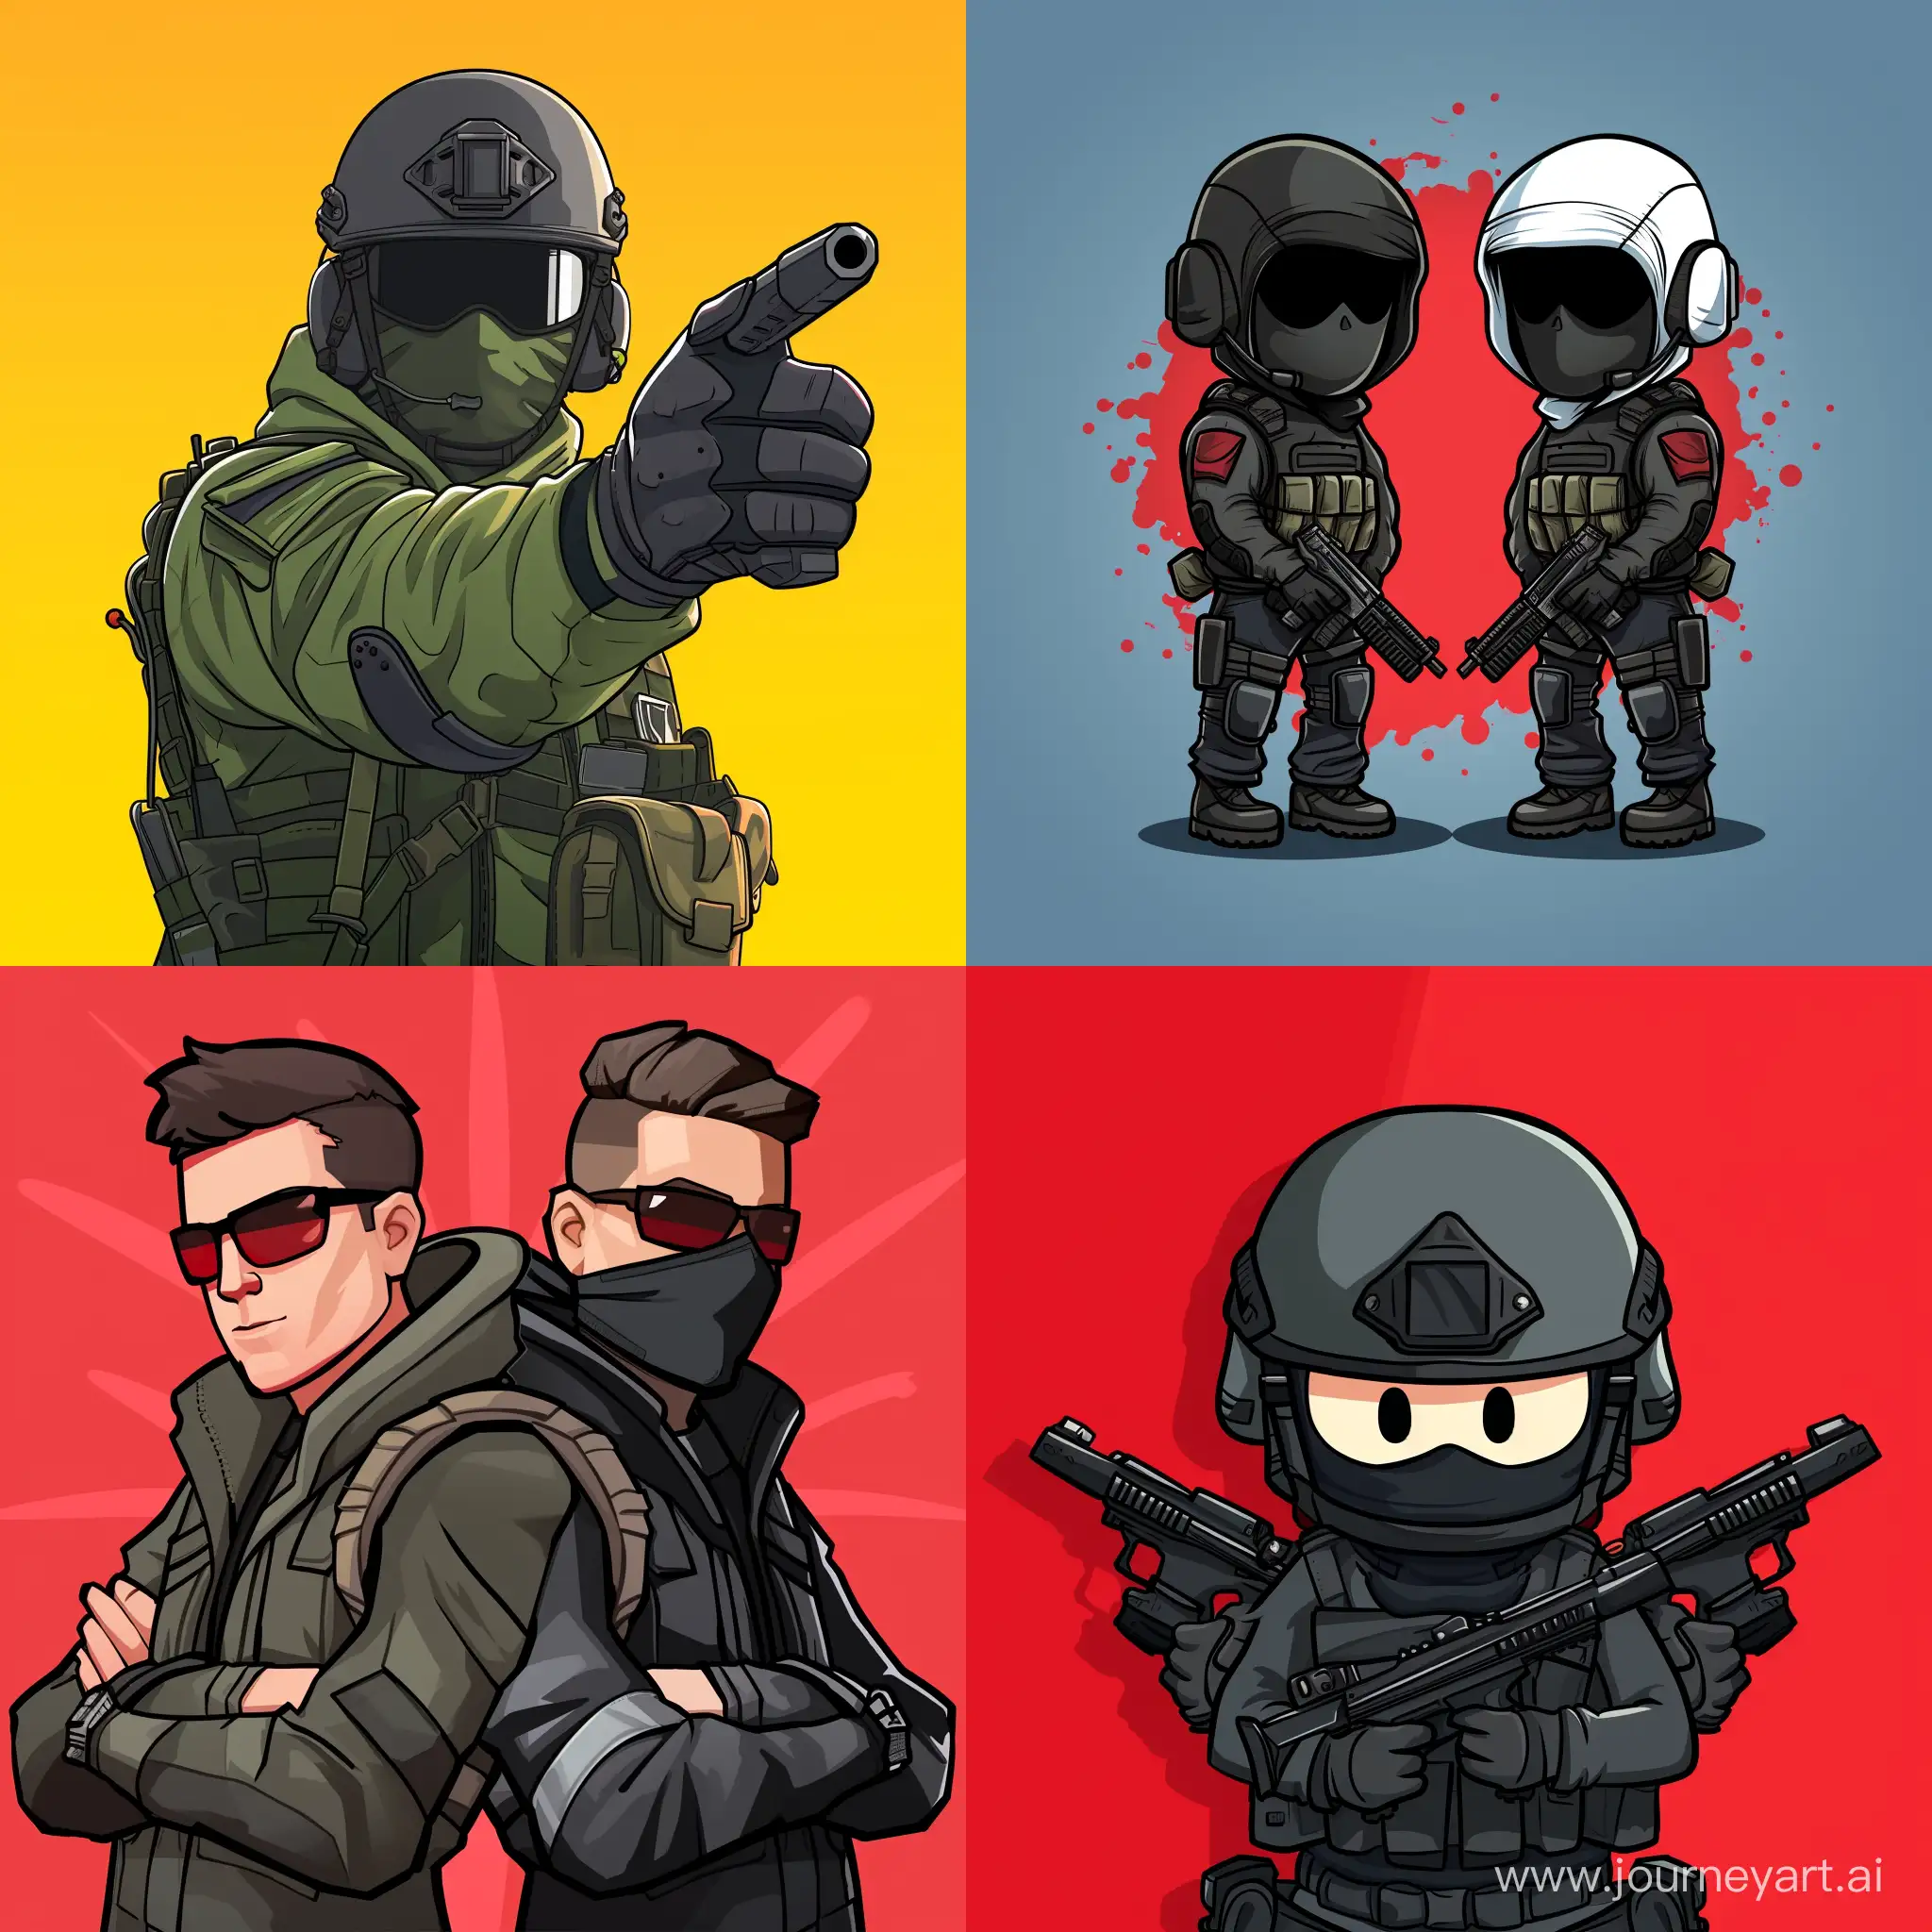 Standoff-2-Meme-Avatar-Playful-and-Memorable-Gaming-Profile-Picture